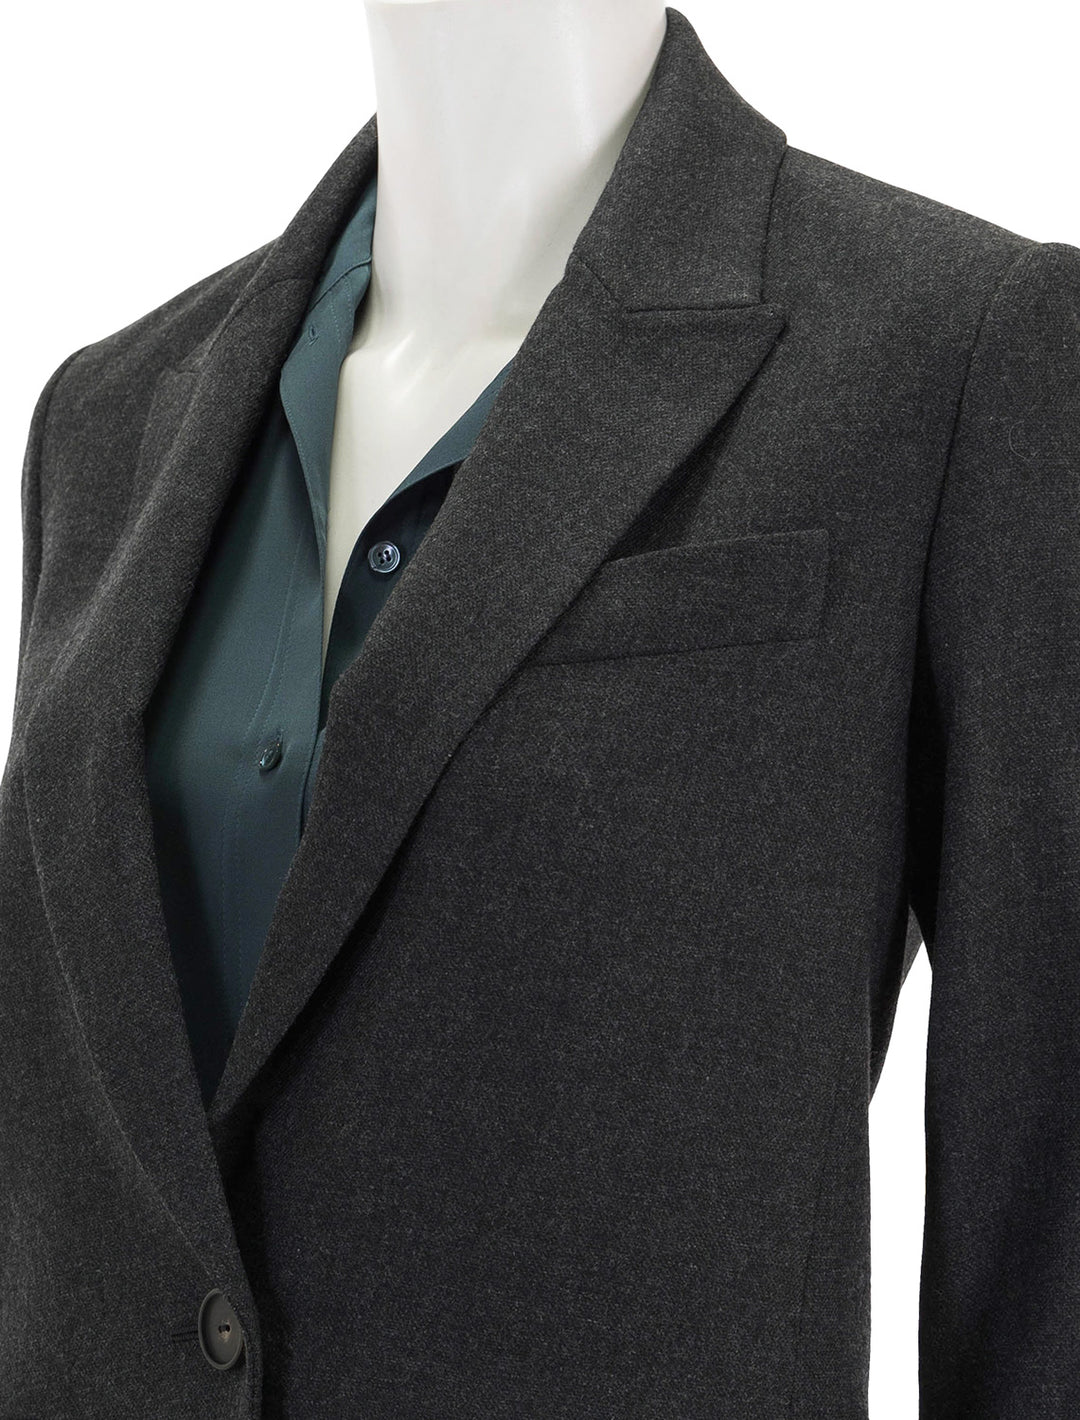 Close-up view of Vince's charcoal single breasted blazer.